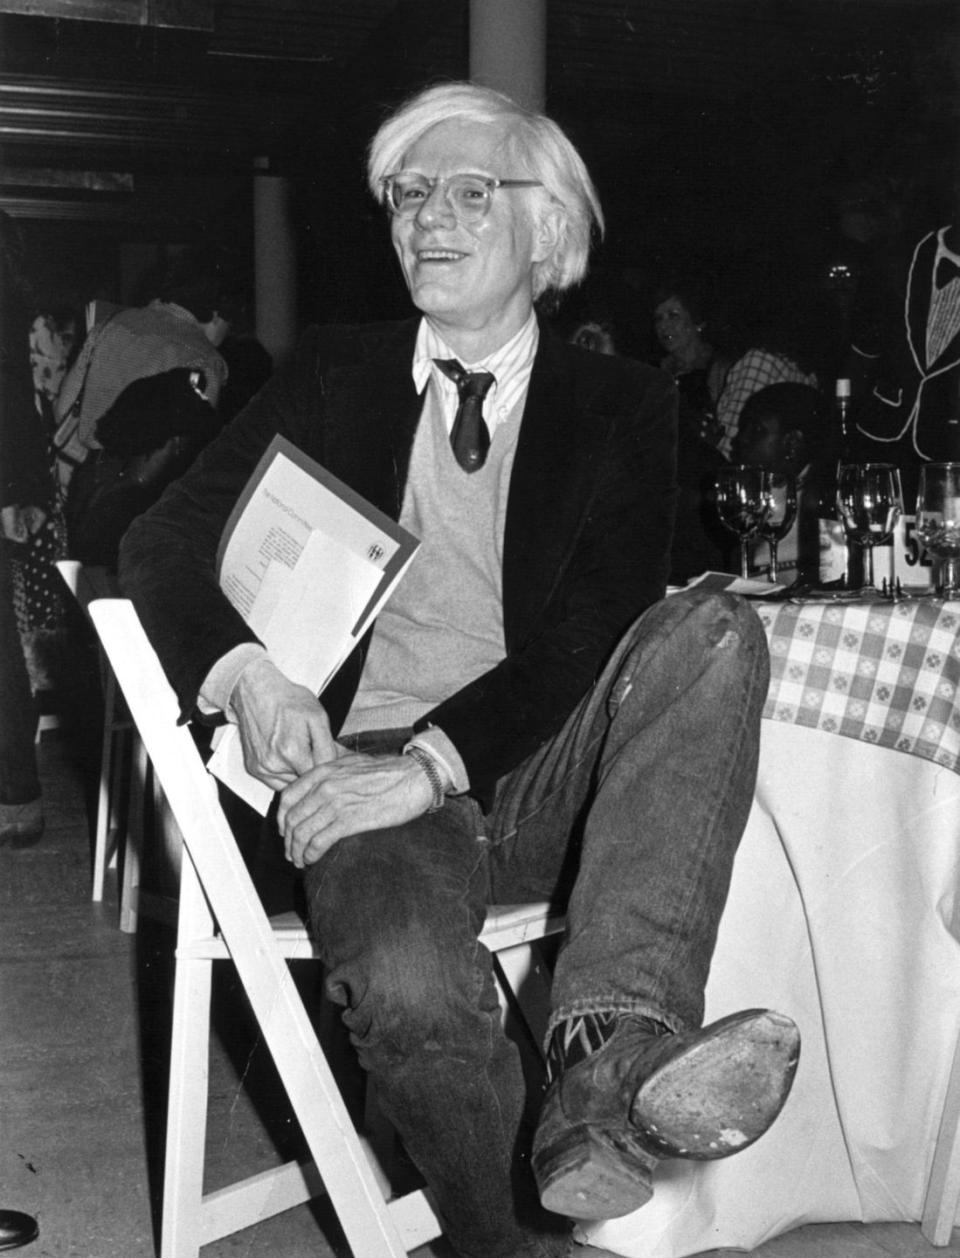 artist andy warhol in cowboy boots at fundraiser, 1979